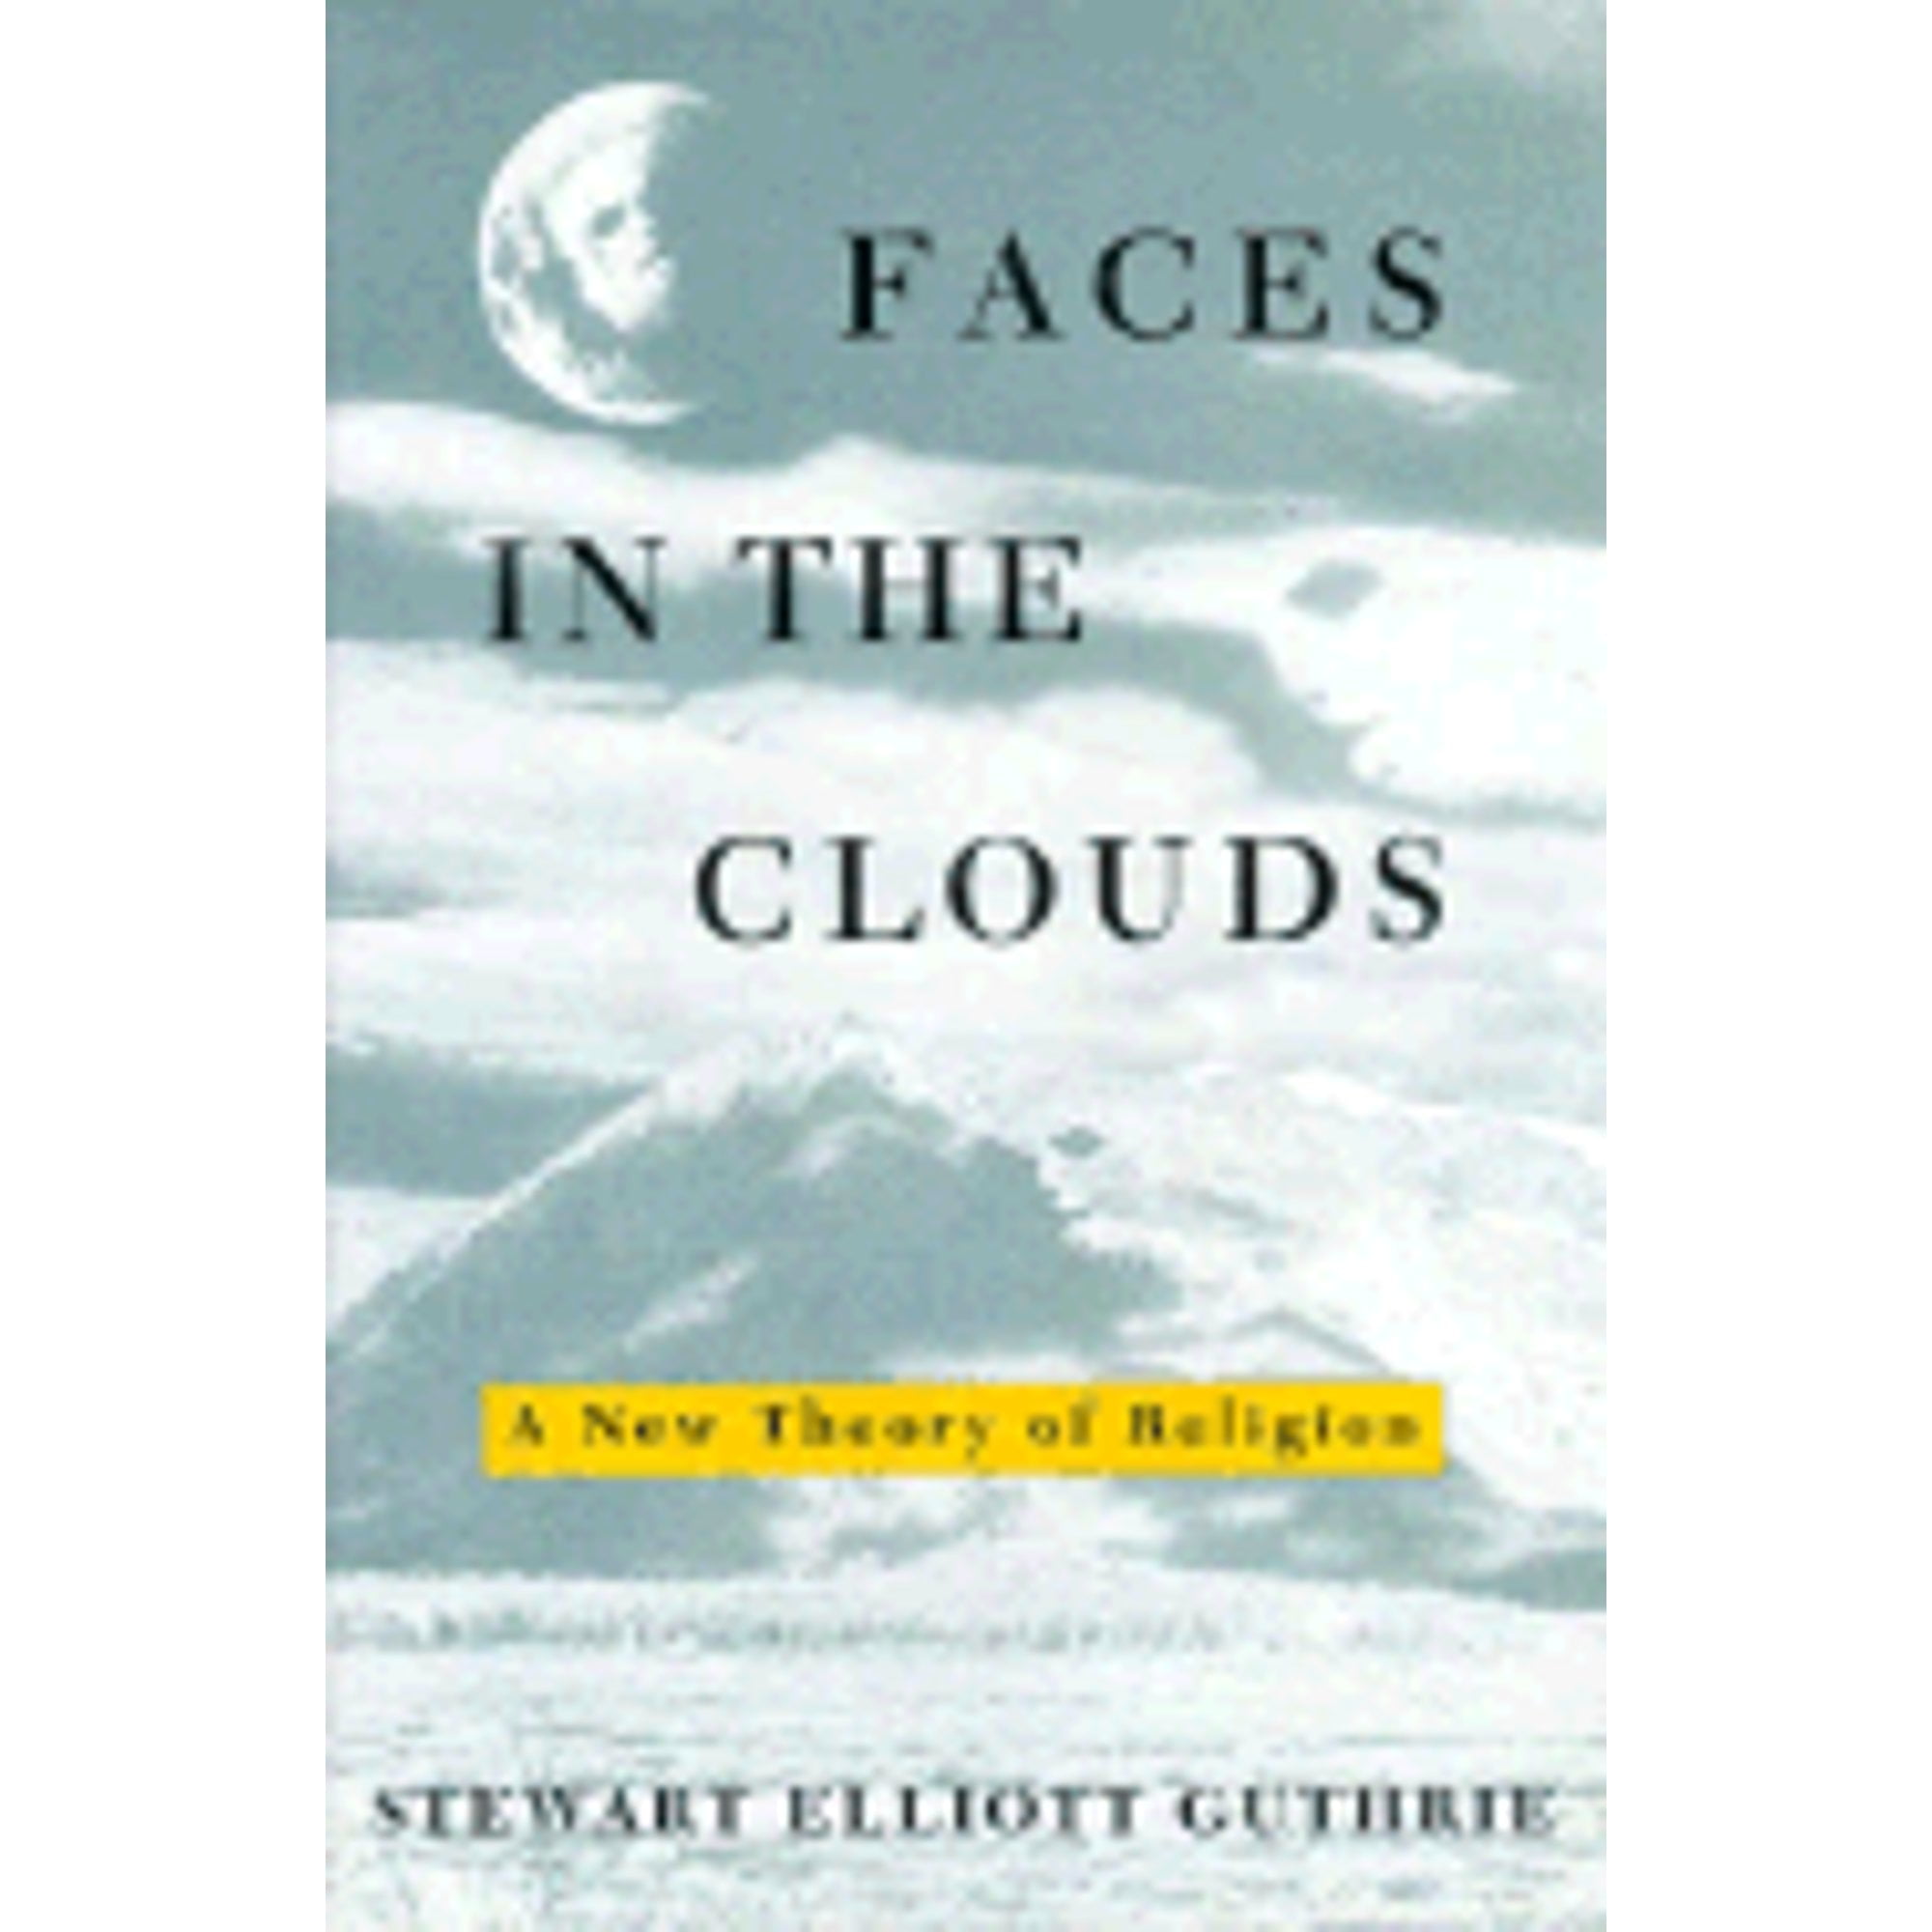 Pre-Owned Faces in the Clouds: A New Theory of Religion (Hardcover 9780195069013) by Stewart Elliott Guthrie